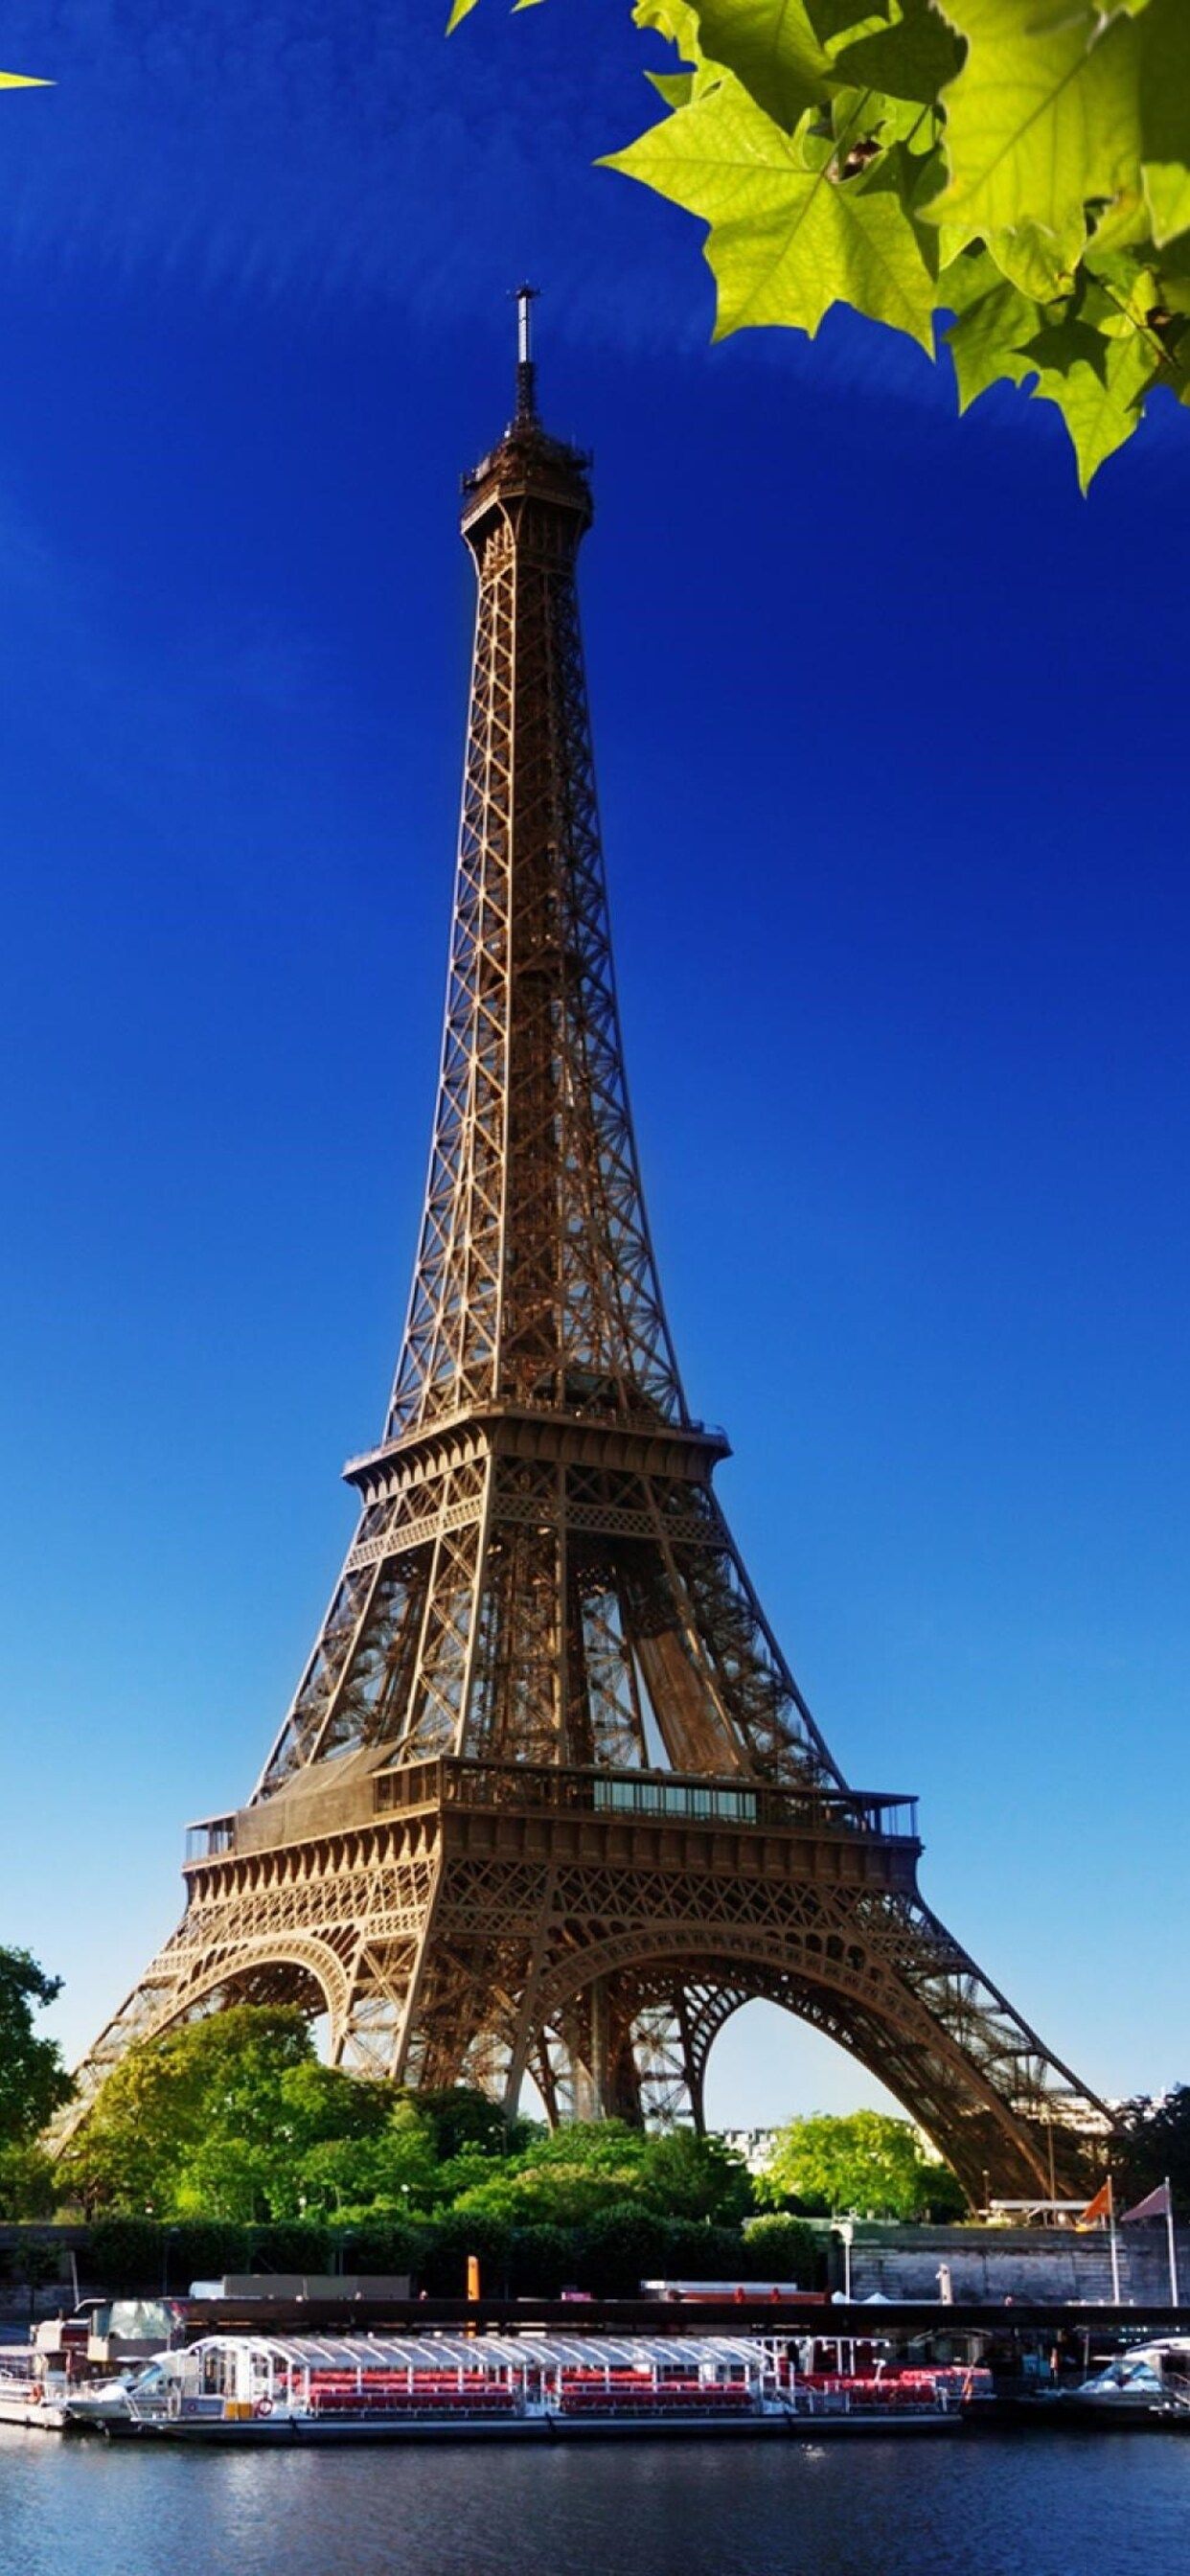 1242x2688 Eiffel Tower Paris 4K Iphone XS MAX HD 4k Wallpapers, Image, Backgrounds, Photos and Pictures